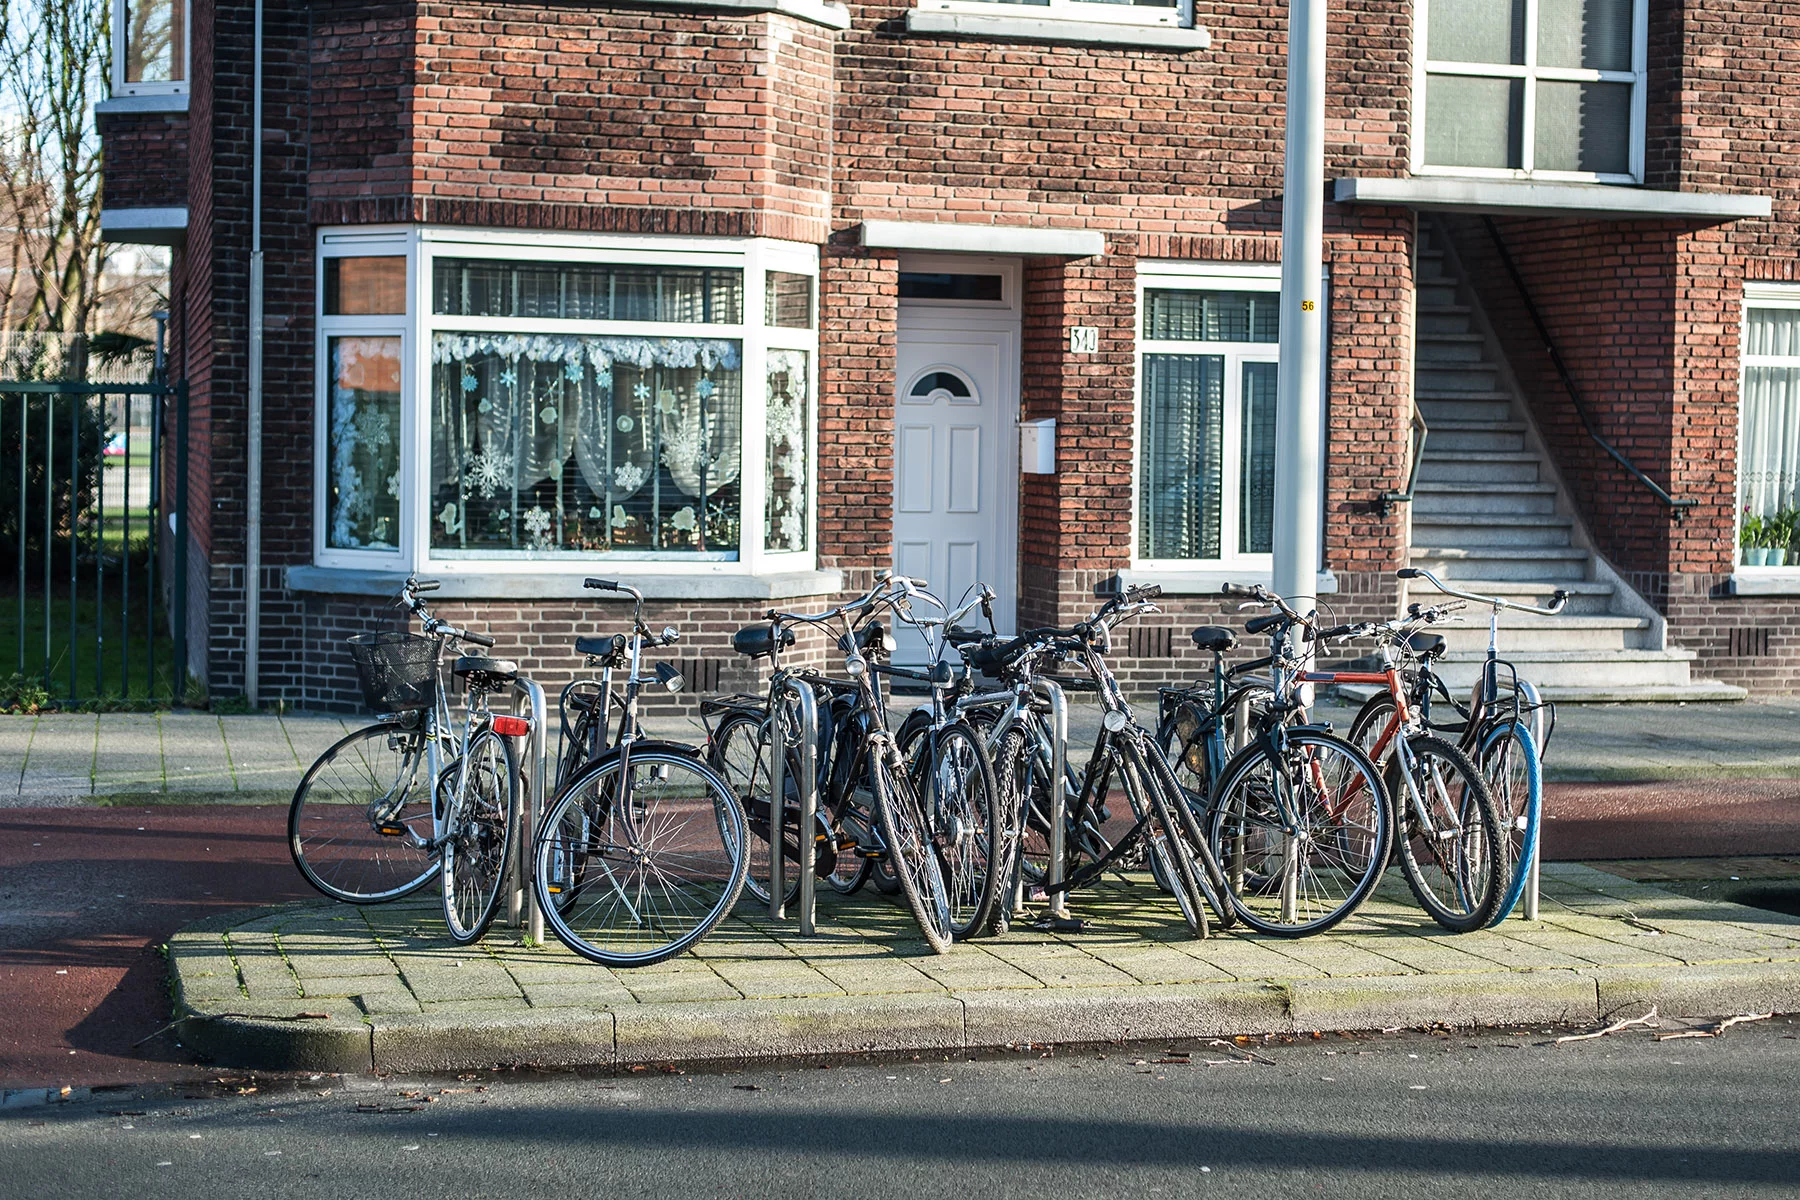 Bicycle parking on an Amsterdam street